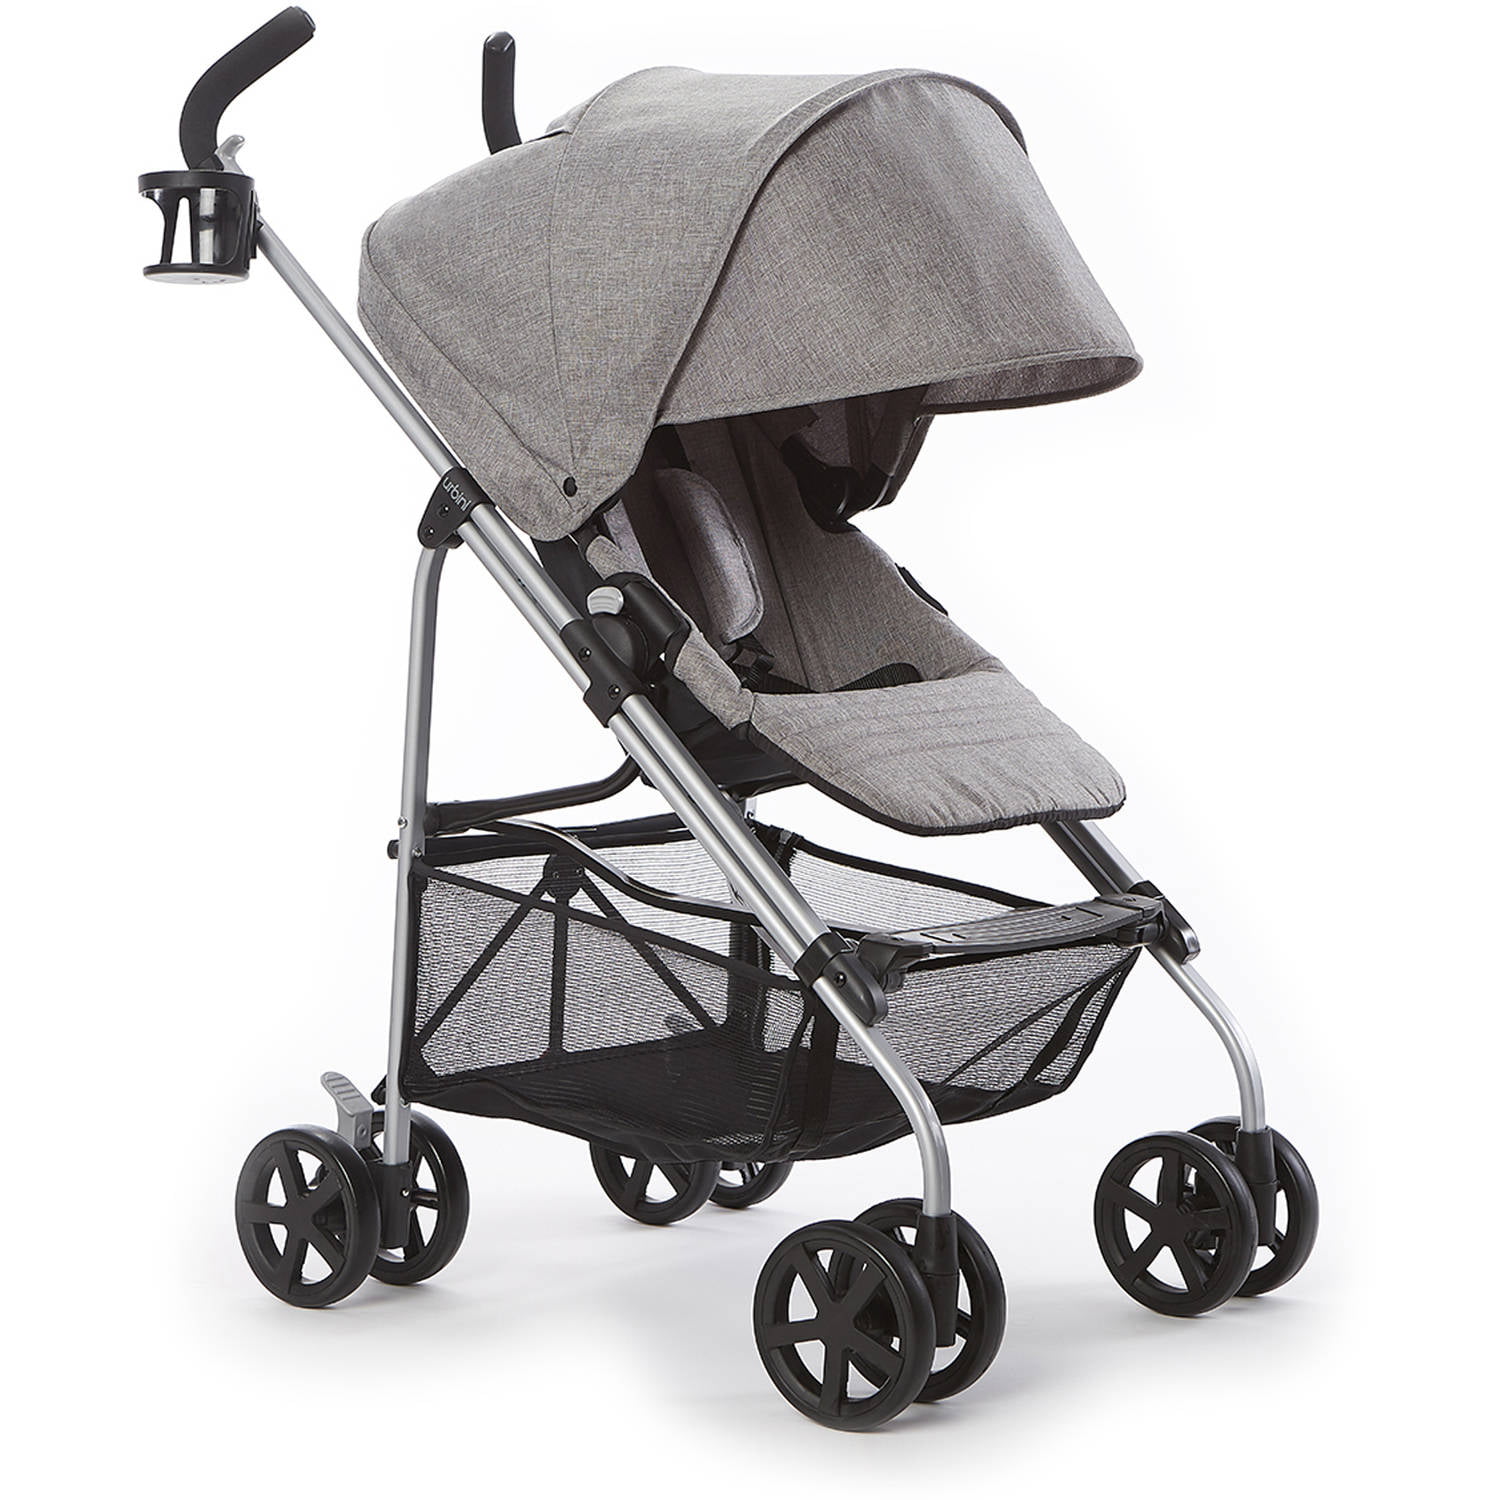 urbini double stroller and carseat